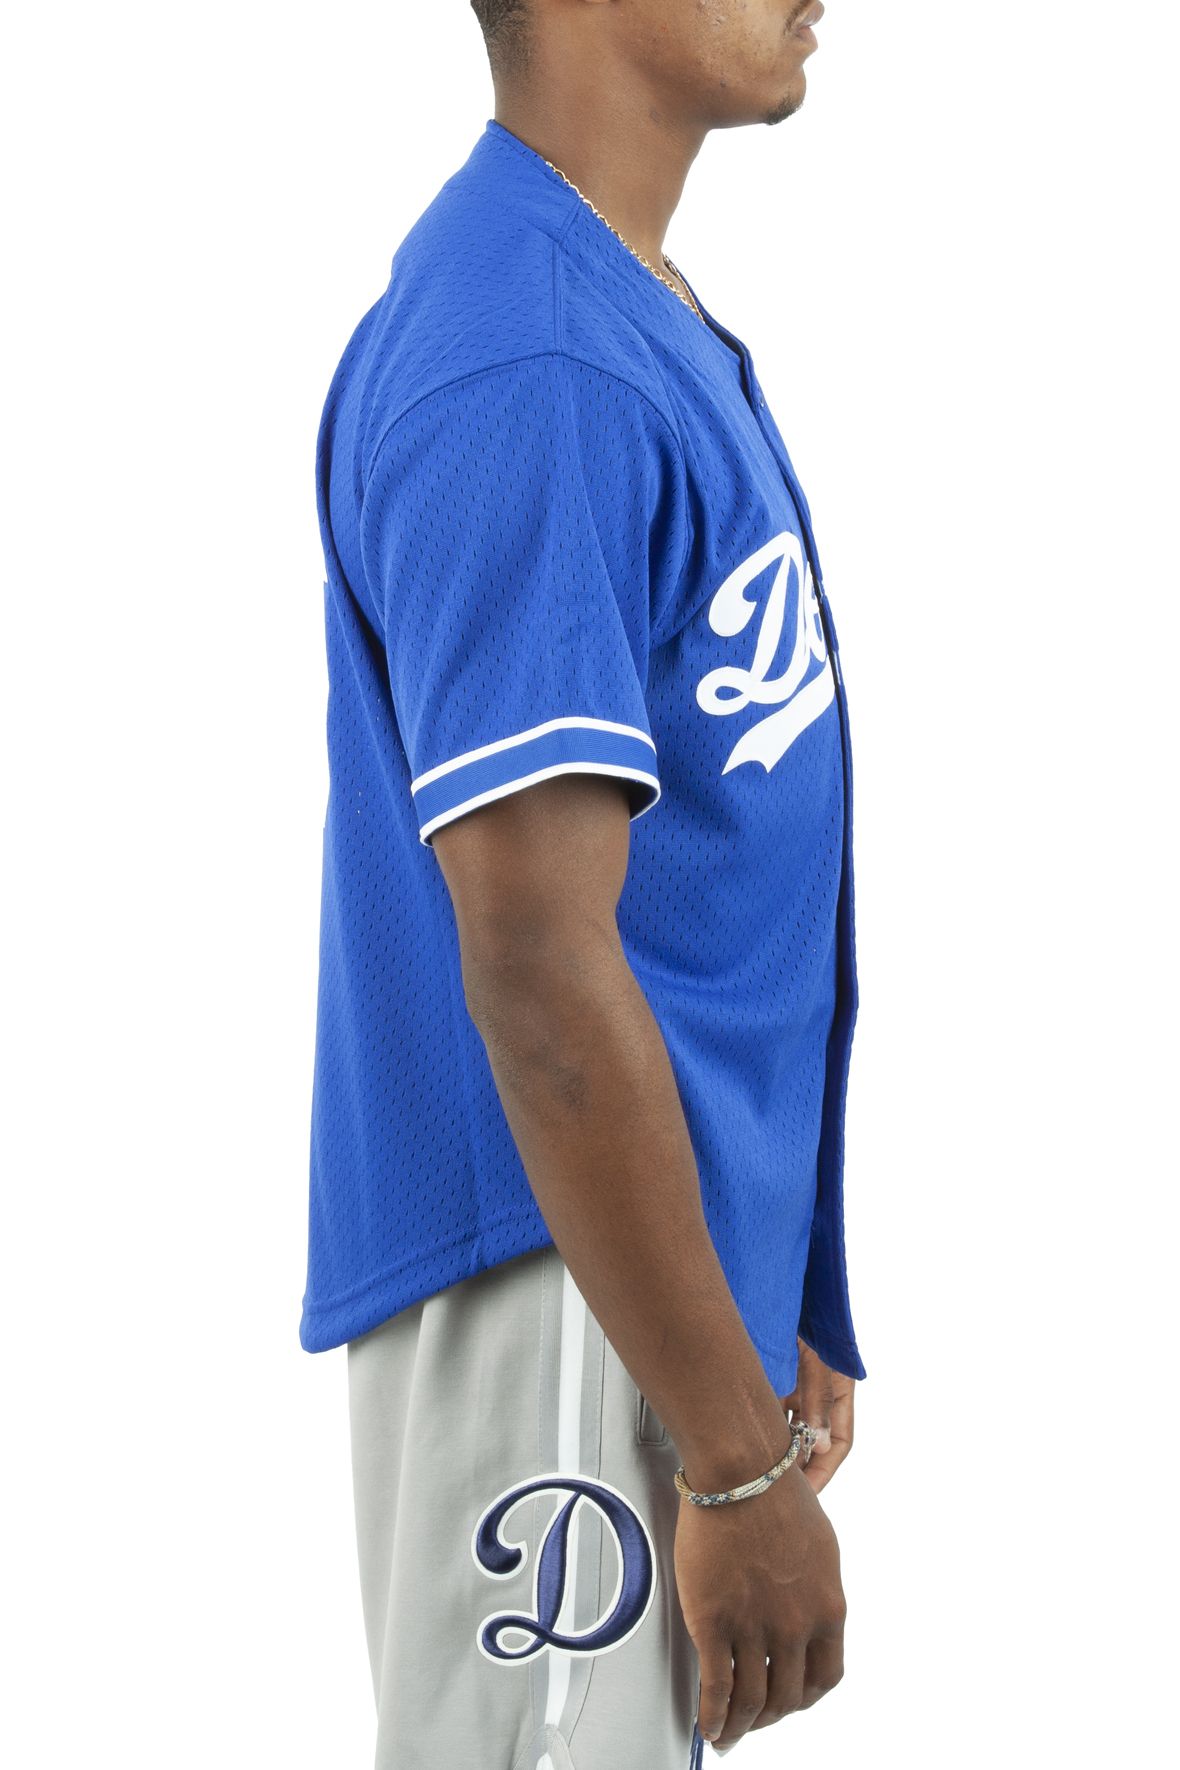 Mitchell & Ness on X: 27 years ago, Nomo changed @mlb forever. The new  1997 Hideo Nomo Los Angeles Dodgers Authentic Jersey is now available  online. Major League Baseball trademarks and copyrights